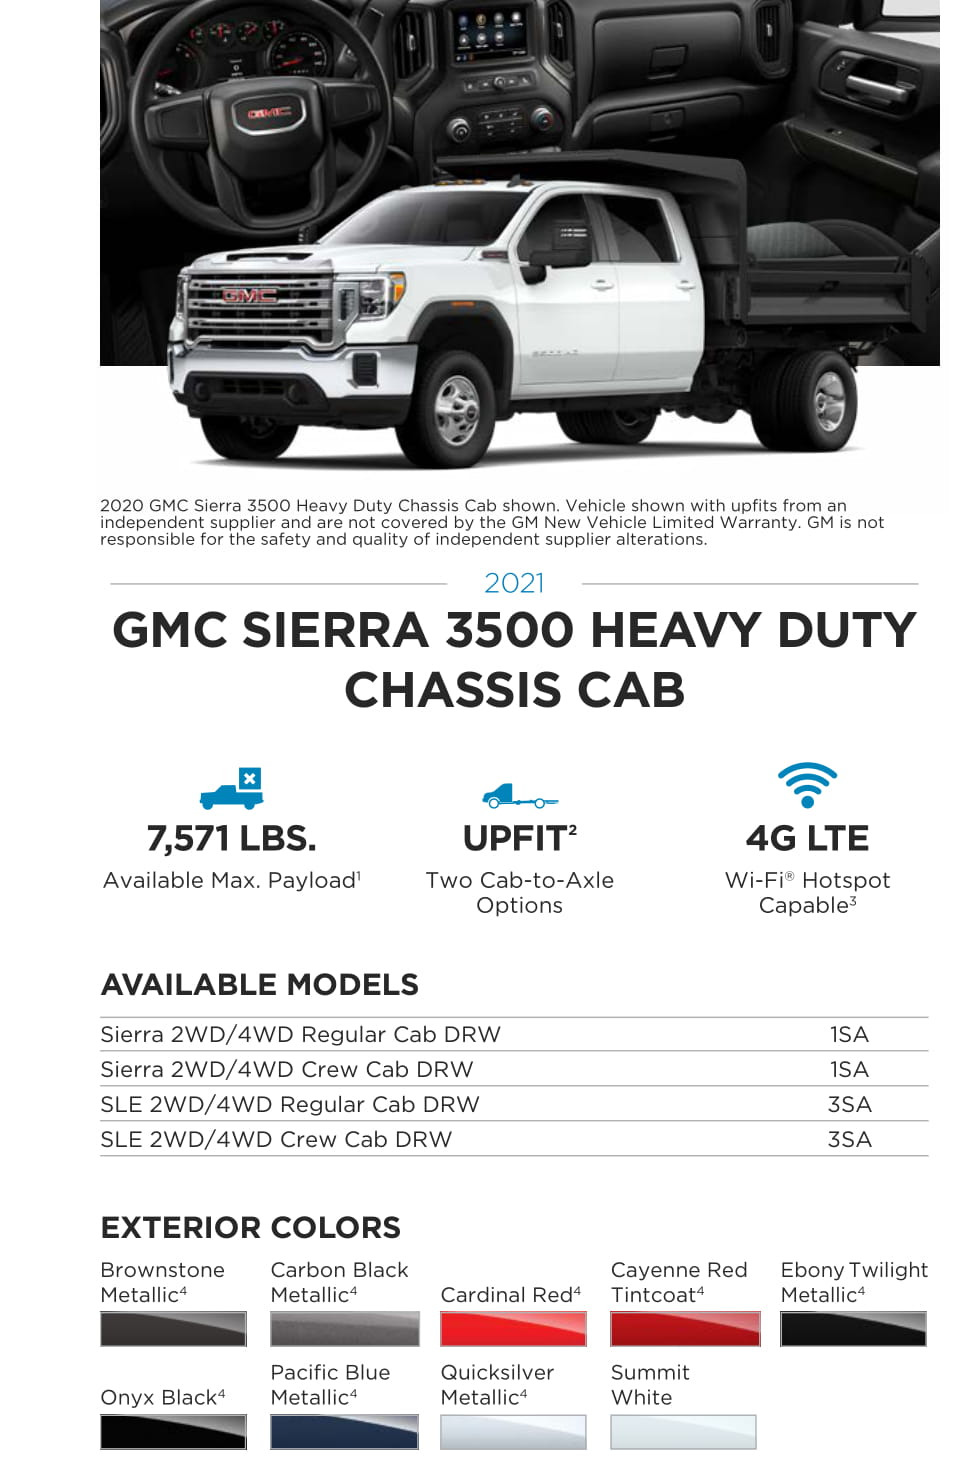 Models and Paint Colors used for this GMC Vehicle in 2021